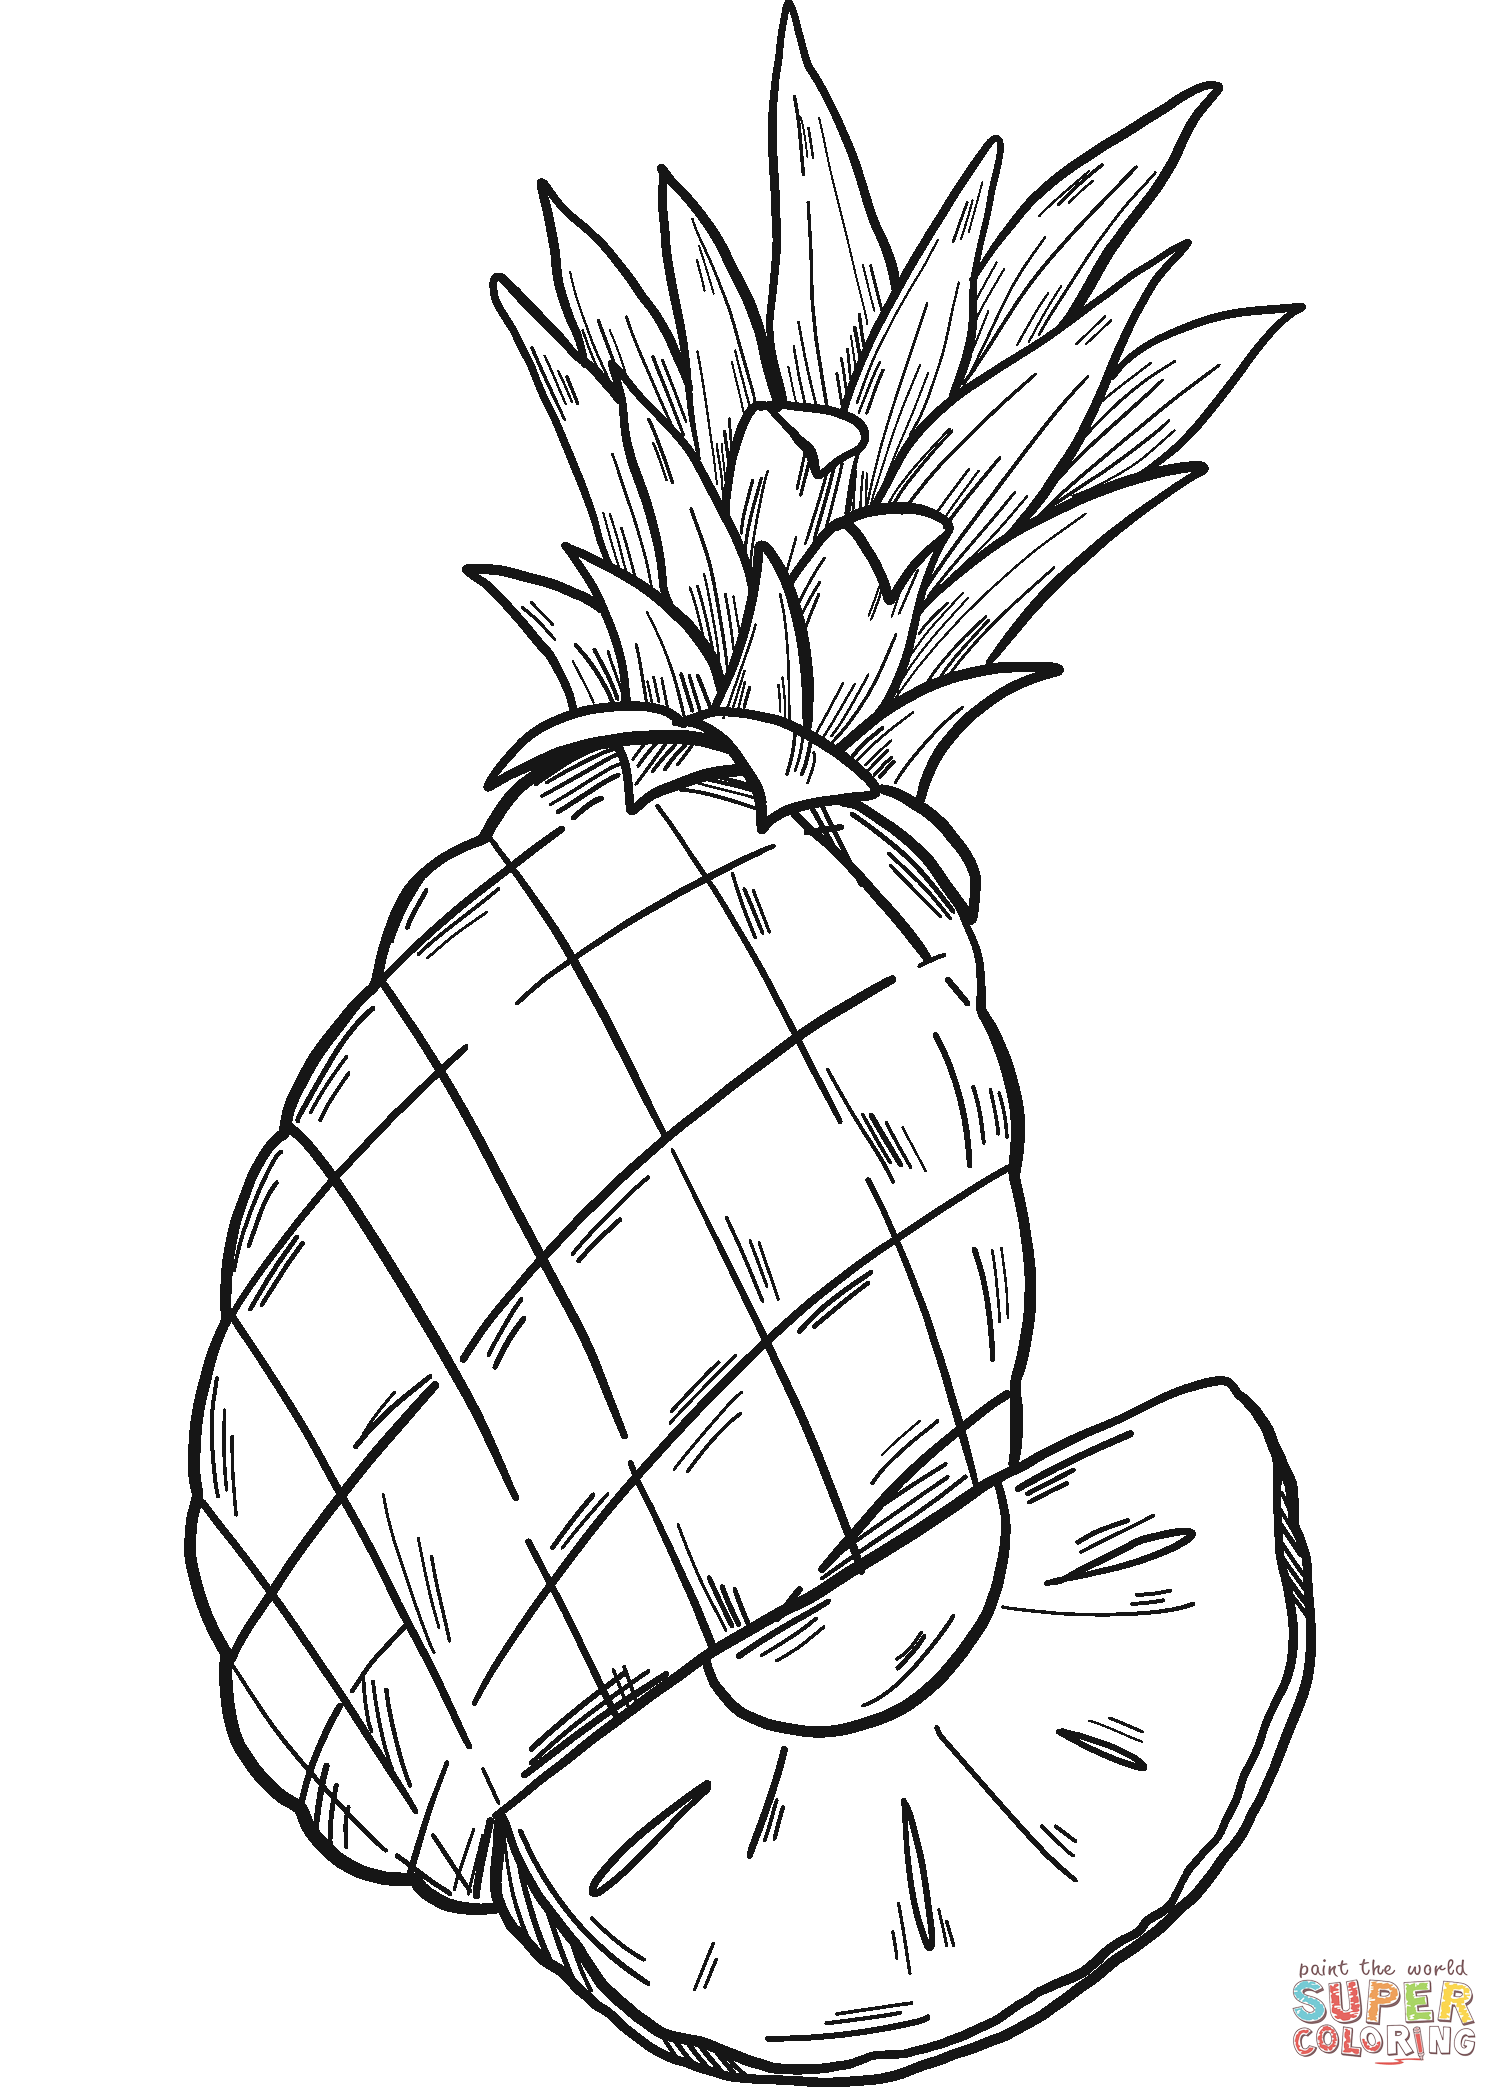 Pineapple coloring page free printable coloring pages